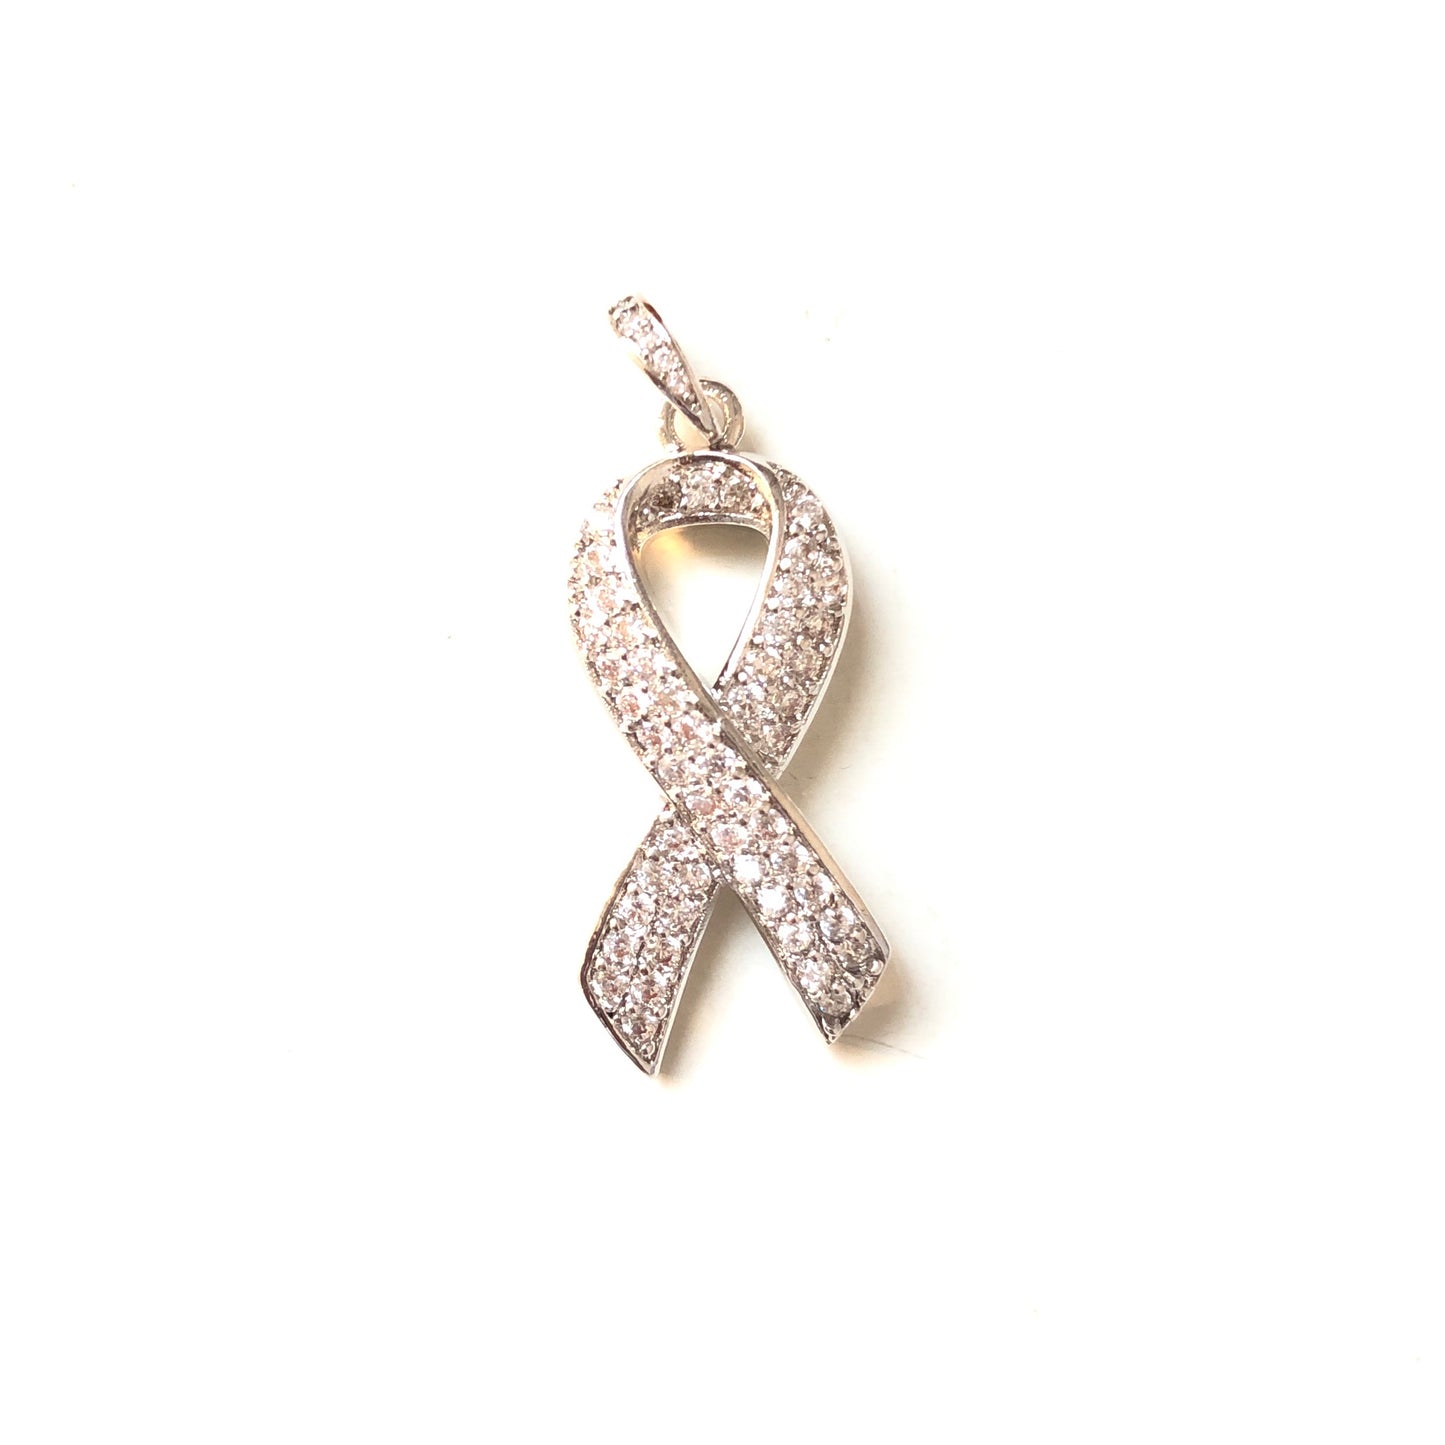 10pcs/lot 27*13mm CZ Paved Pink Ribbon Breast Cancer Awareness Charms Silver CZ Paved Charms Breast Cancer Awareness Charms Beads Beyond